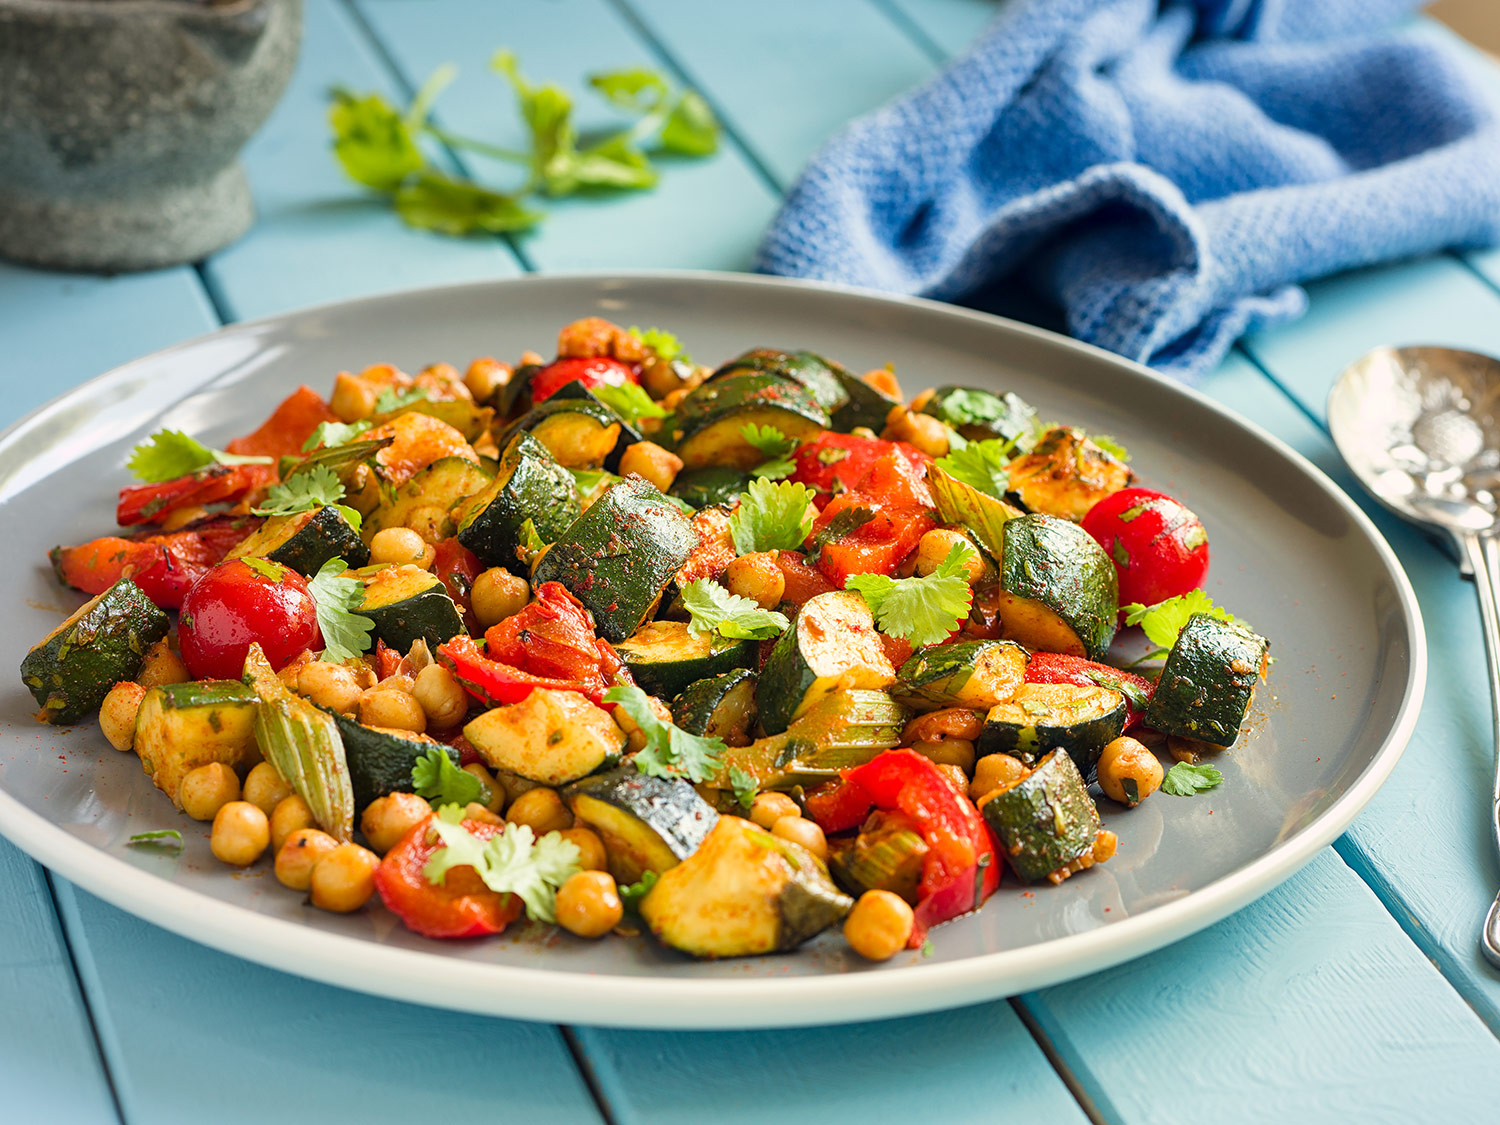 Spicy Roasted Vegetable With Chickpeas Recipe